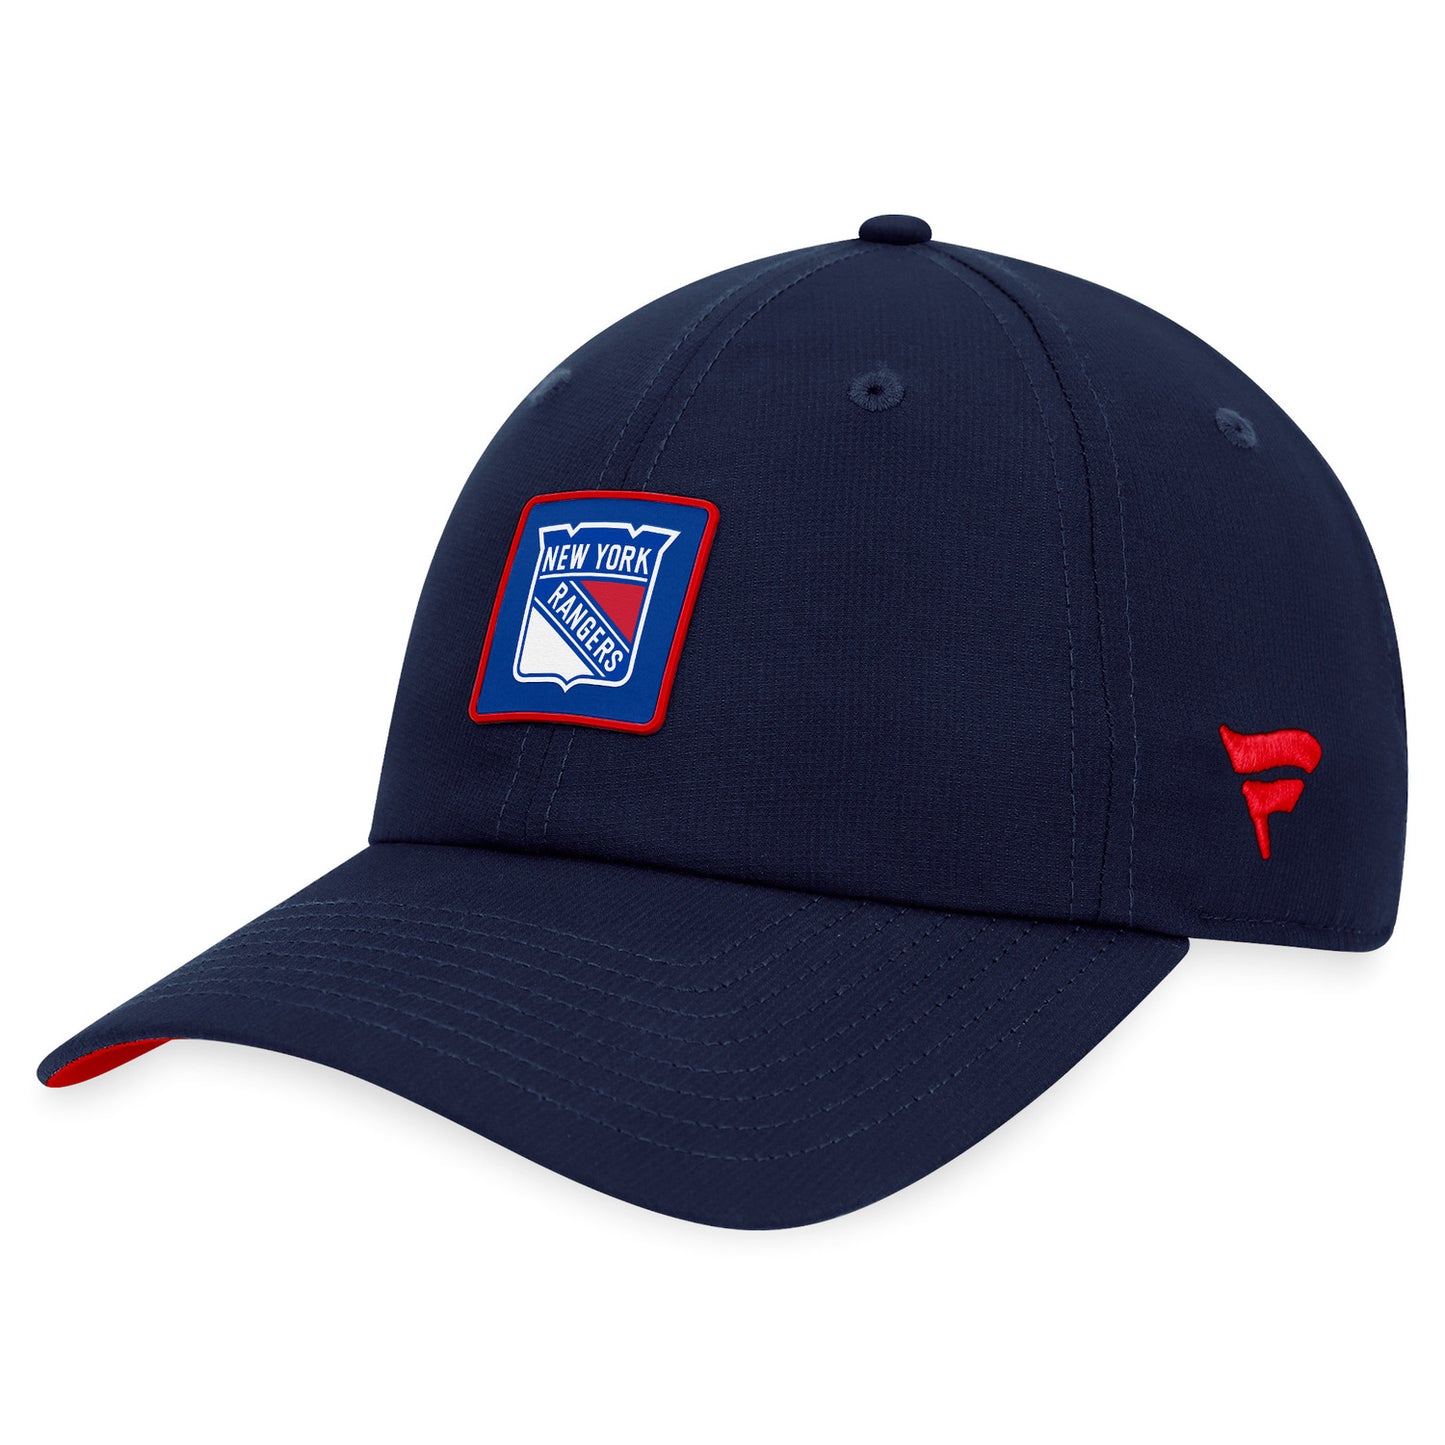 Fanatics Rangers 23-24 Authentic Pro Rink Performance Adjustable Hat - Angled Left View